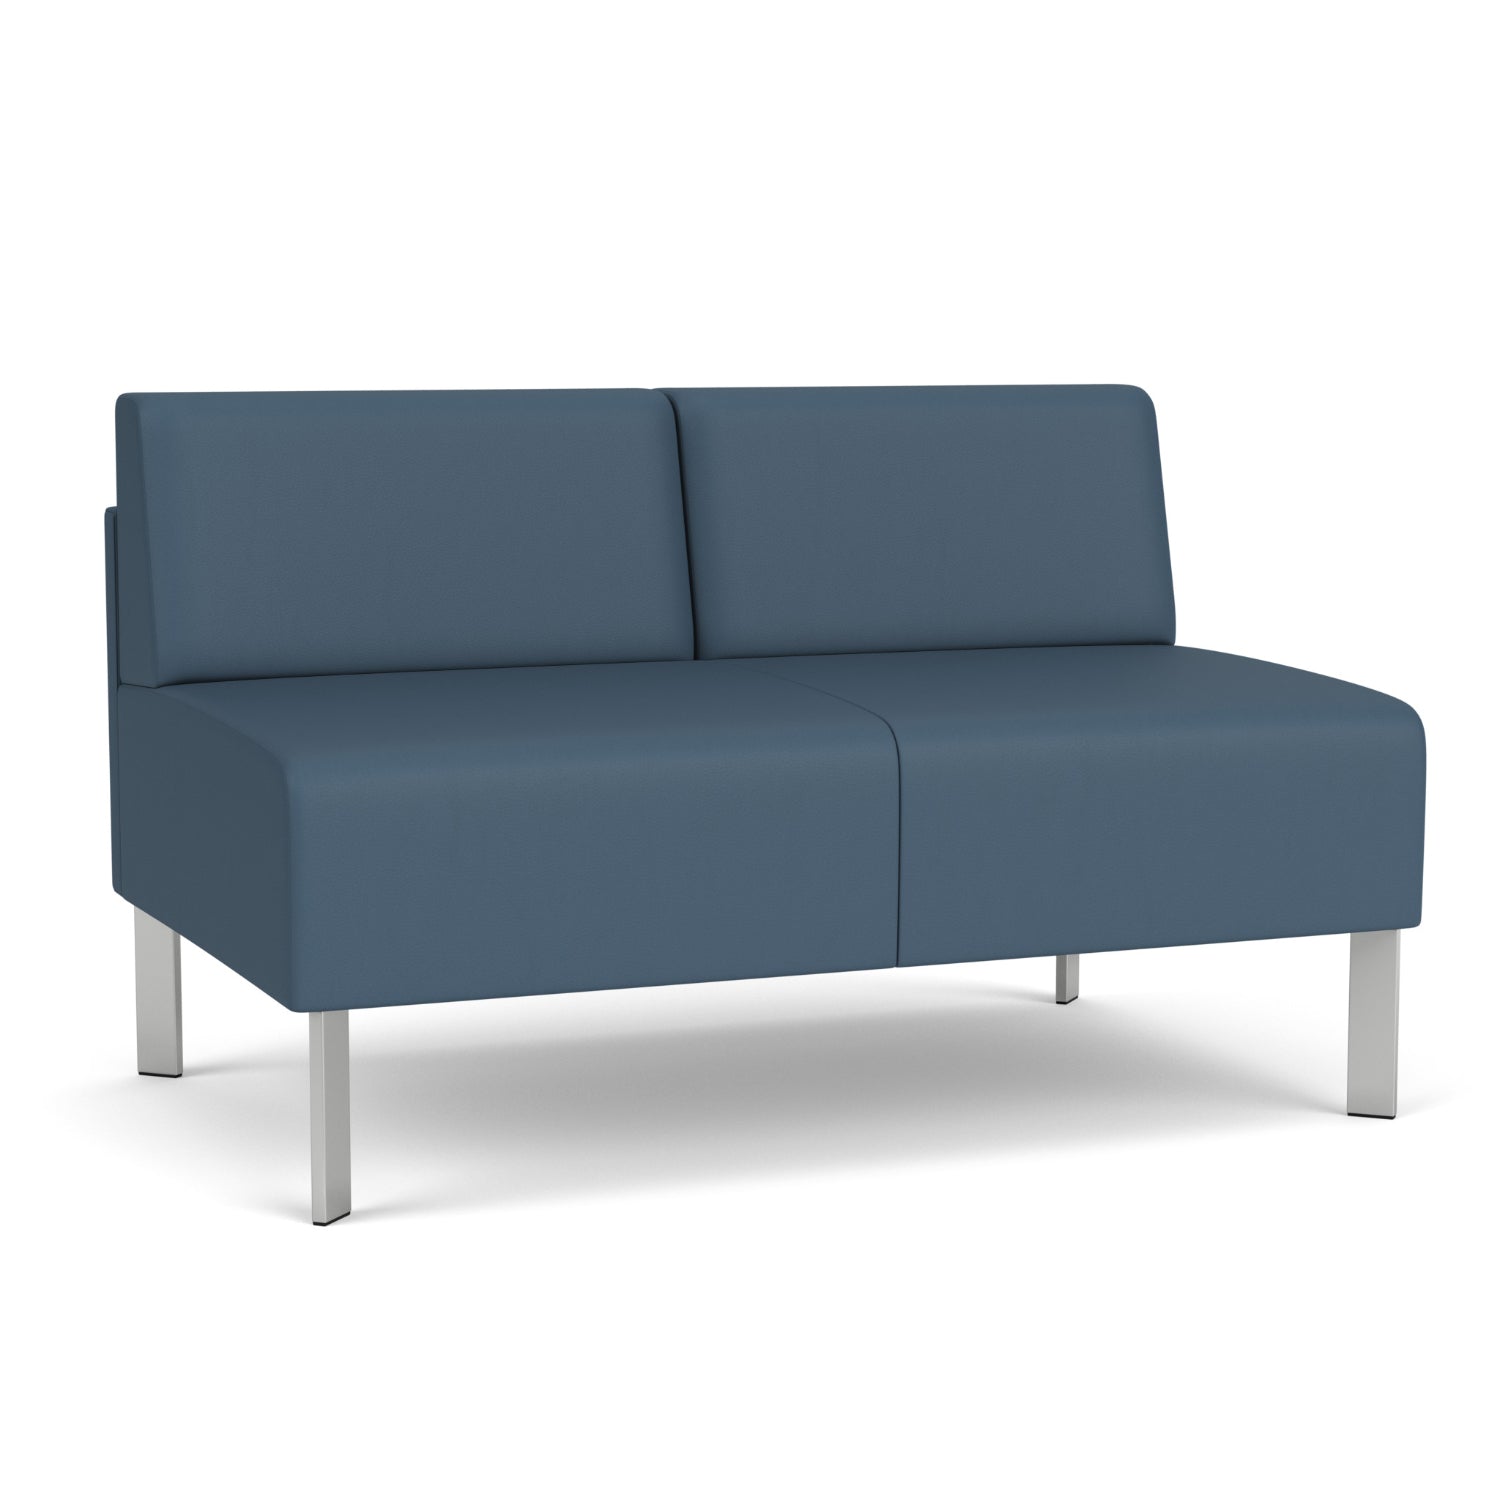 Luxe Collection Reception Seating, Armless Loveseat, Standard Vinyl Upholstery, FREE SHIPPING